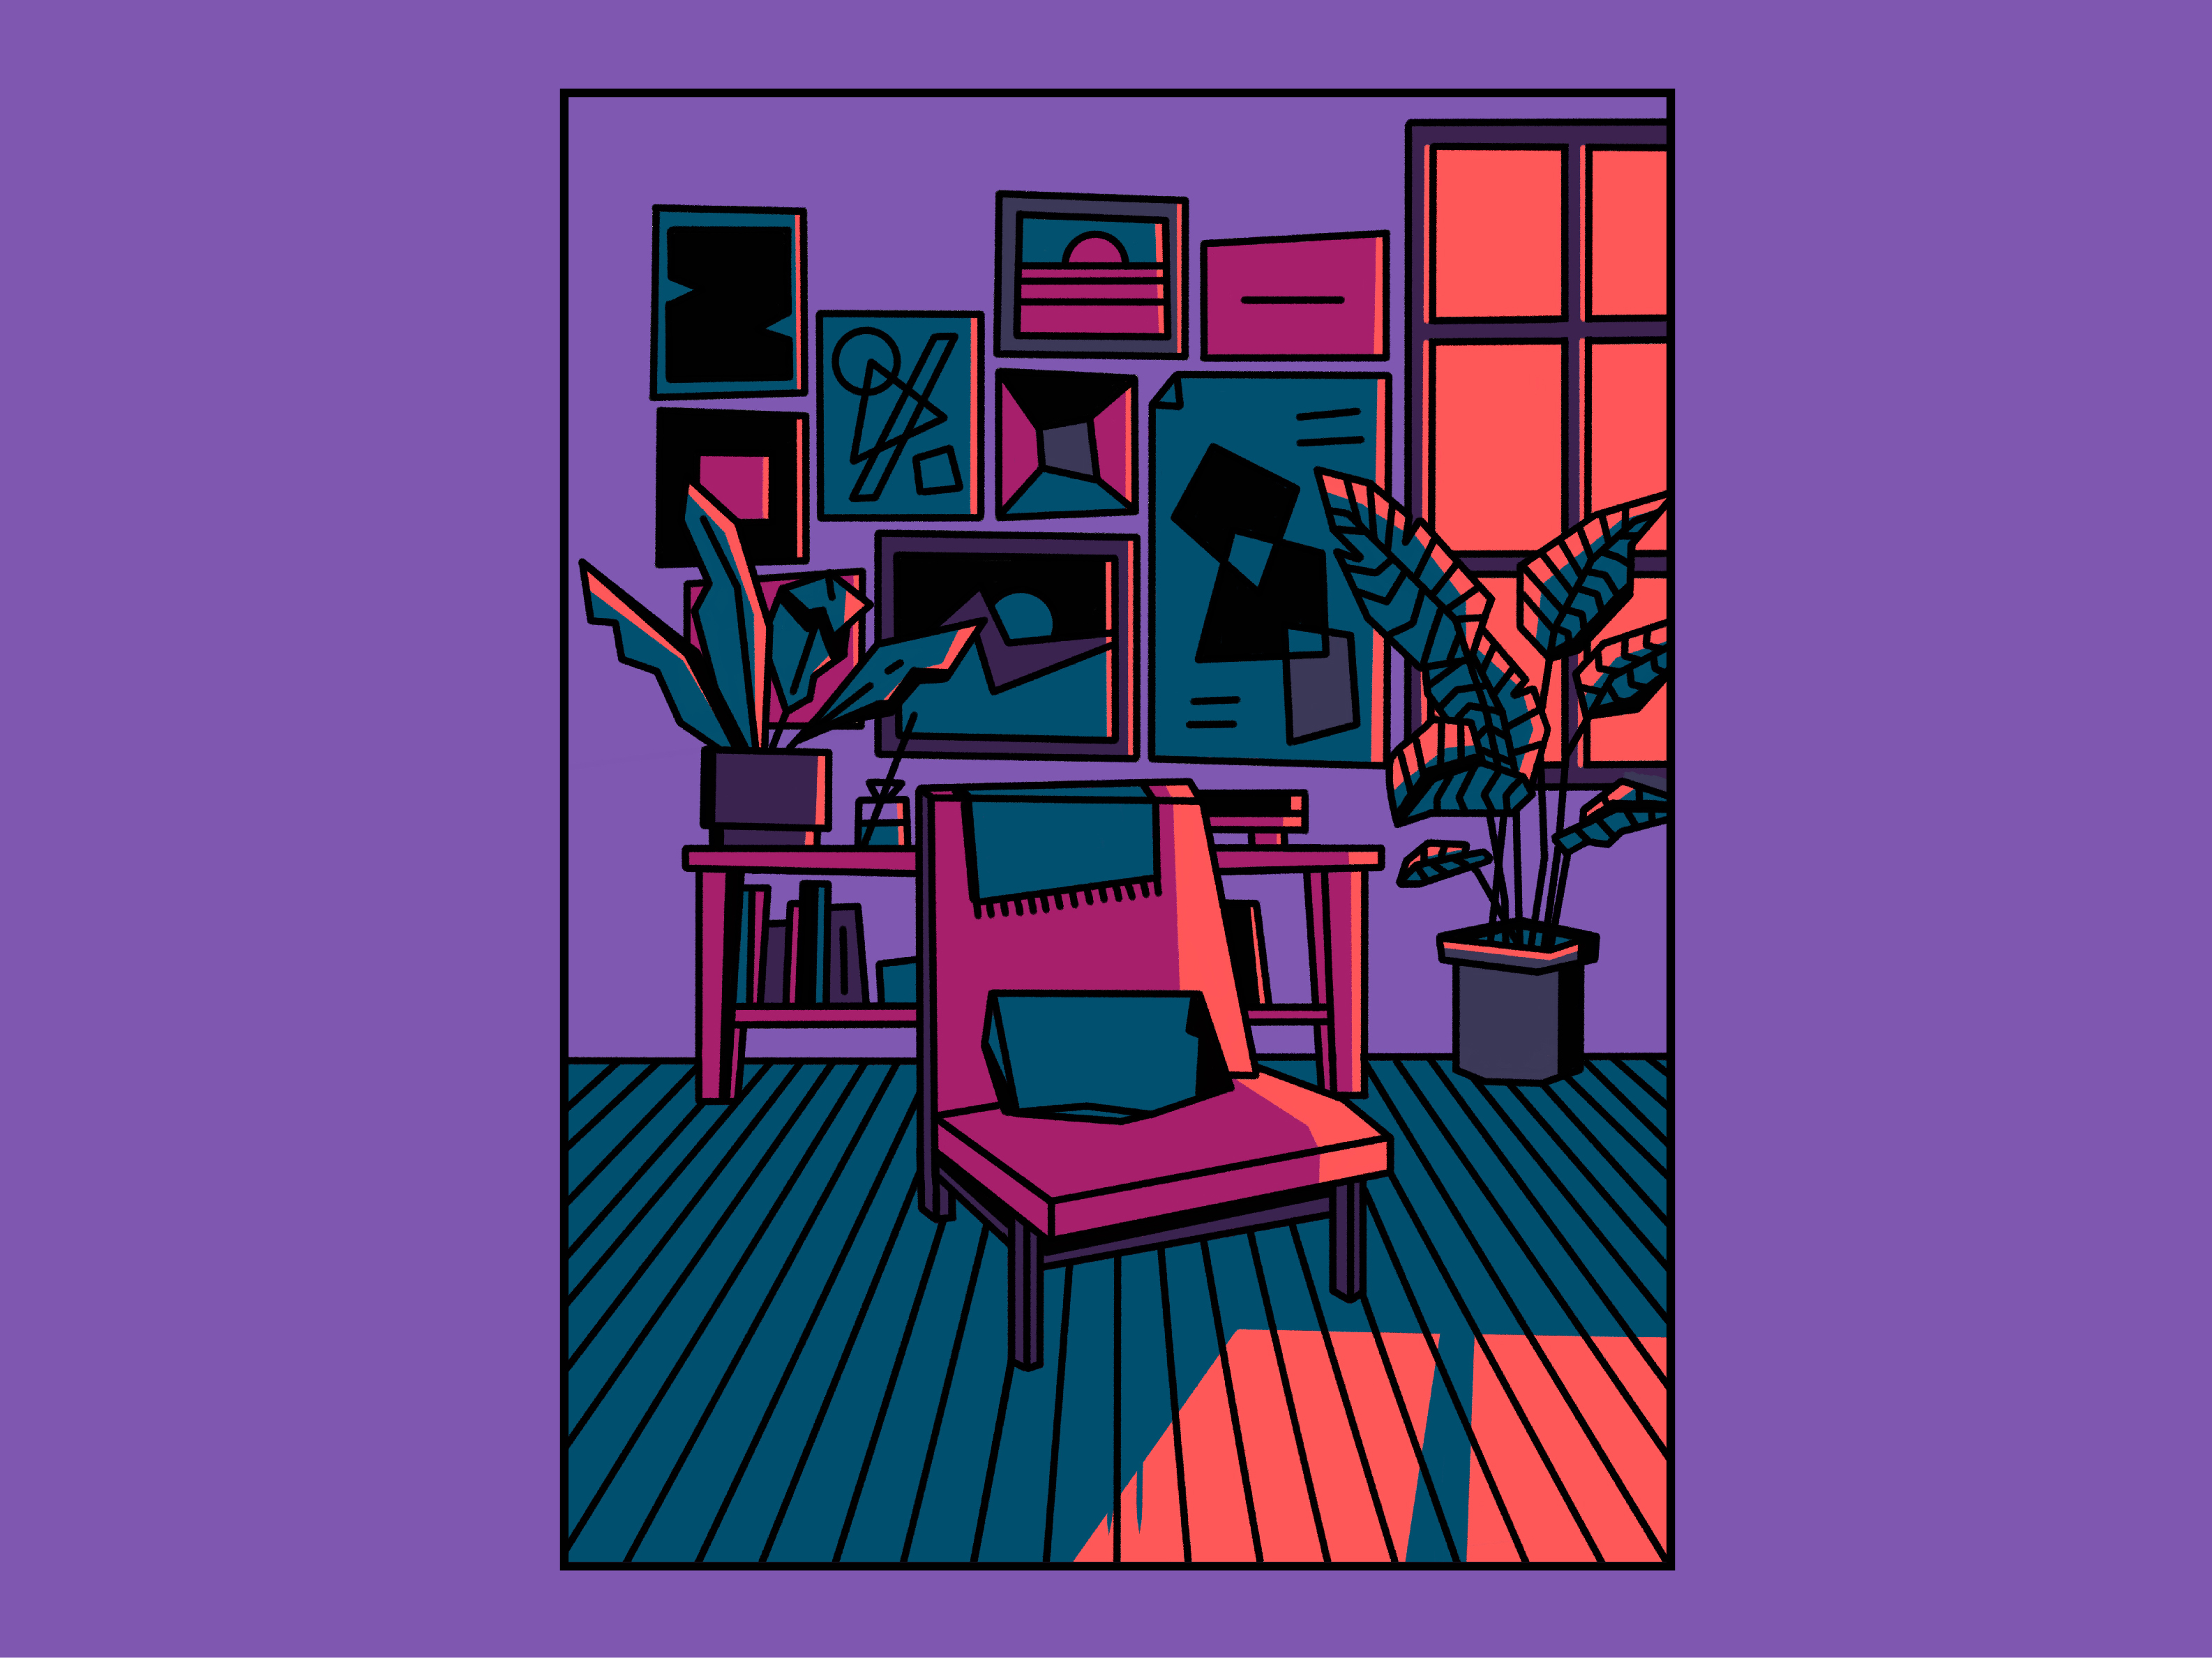 Chair by isaac claramunt on Dribbble